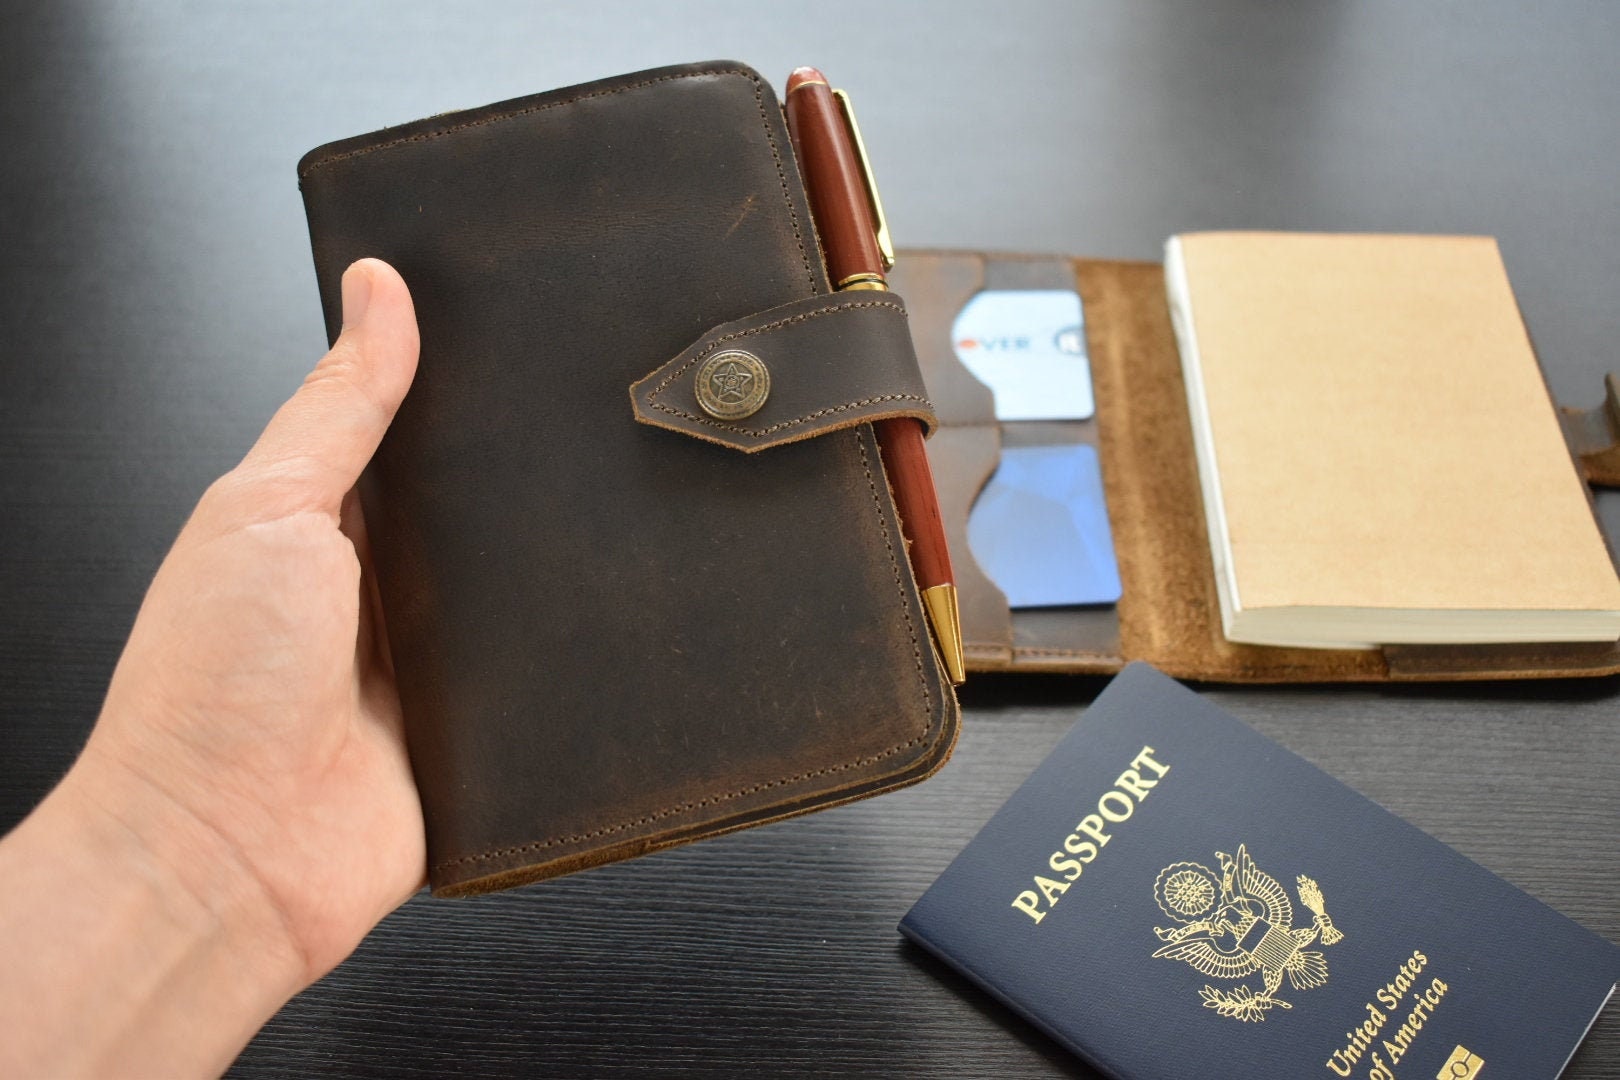 Bags & Purses Luggage & Travel Travel Wallets Leather Travel Pocket Journal Passport Cover Field Notes Holder Father's Day Gift Personalized Leather Travel Wallet 